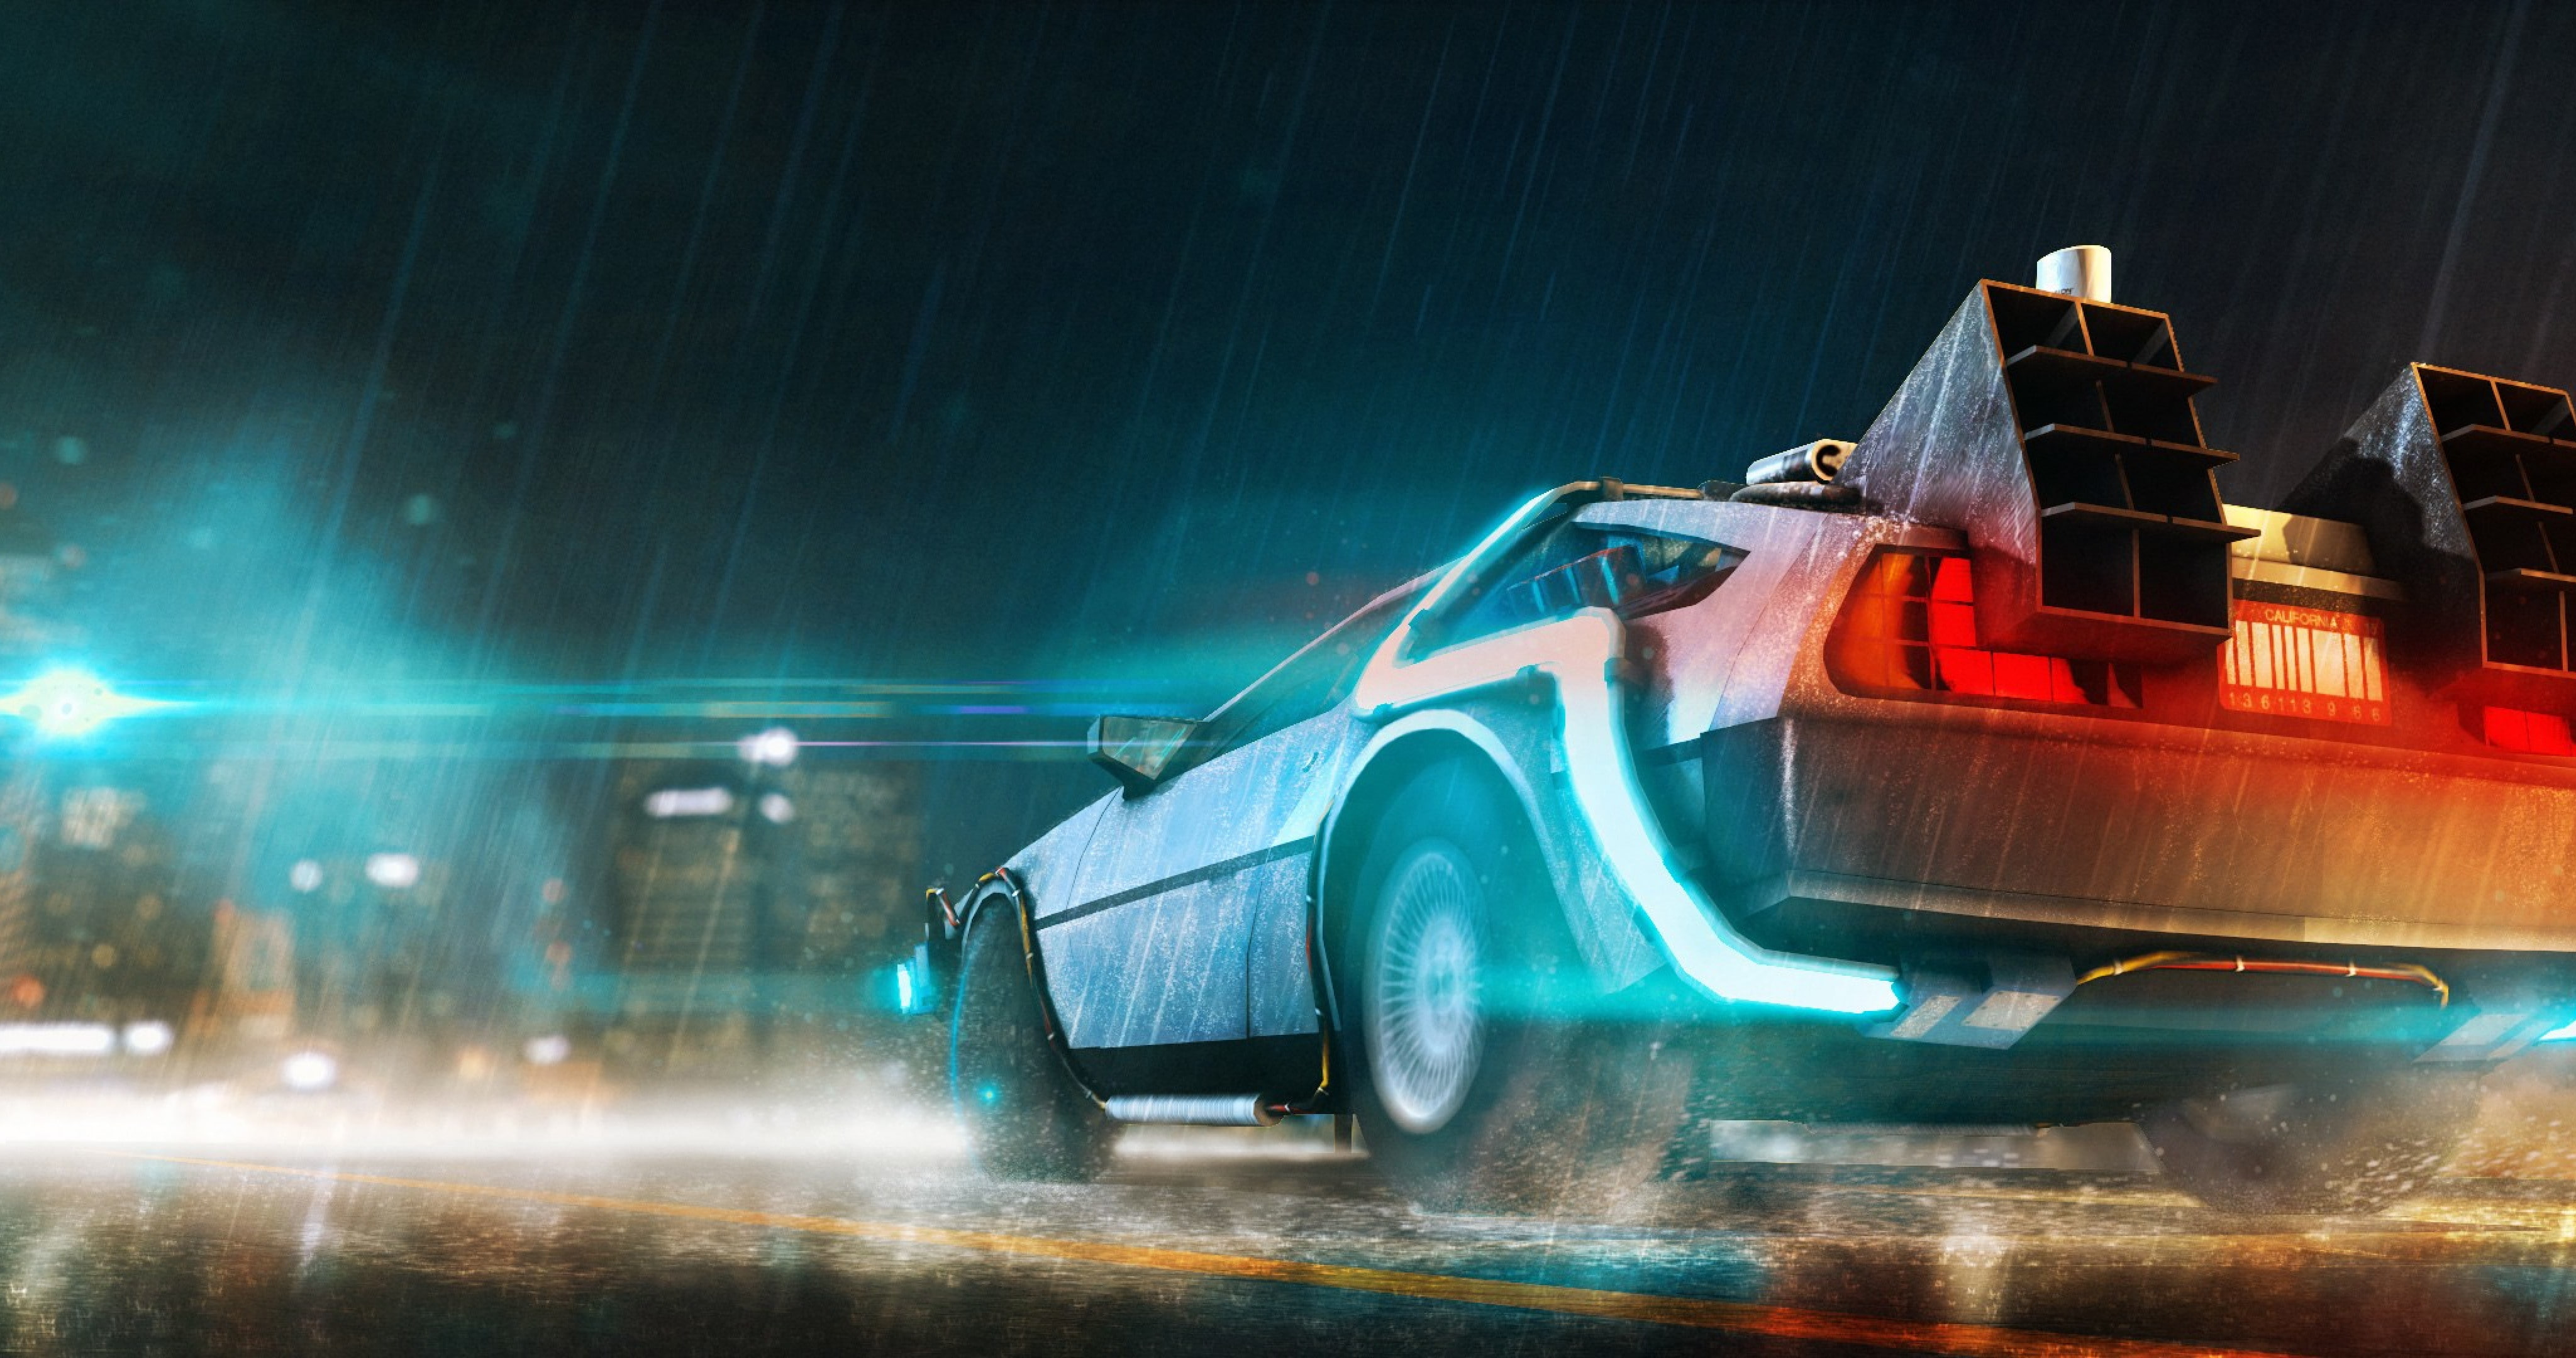 back to the future, cars, hd, 4k, movies